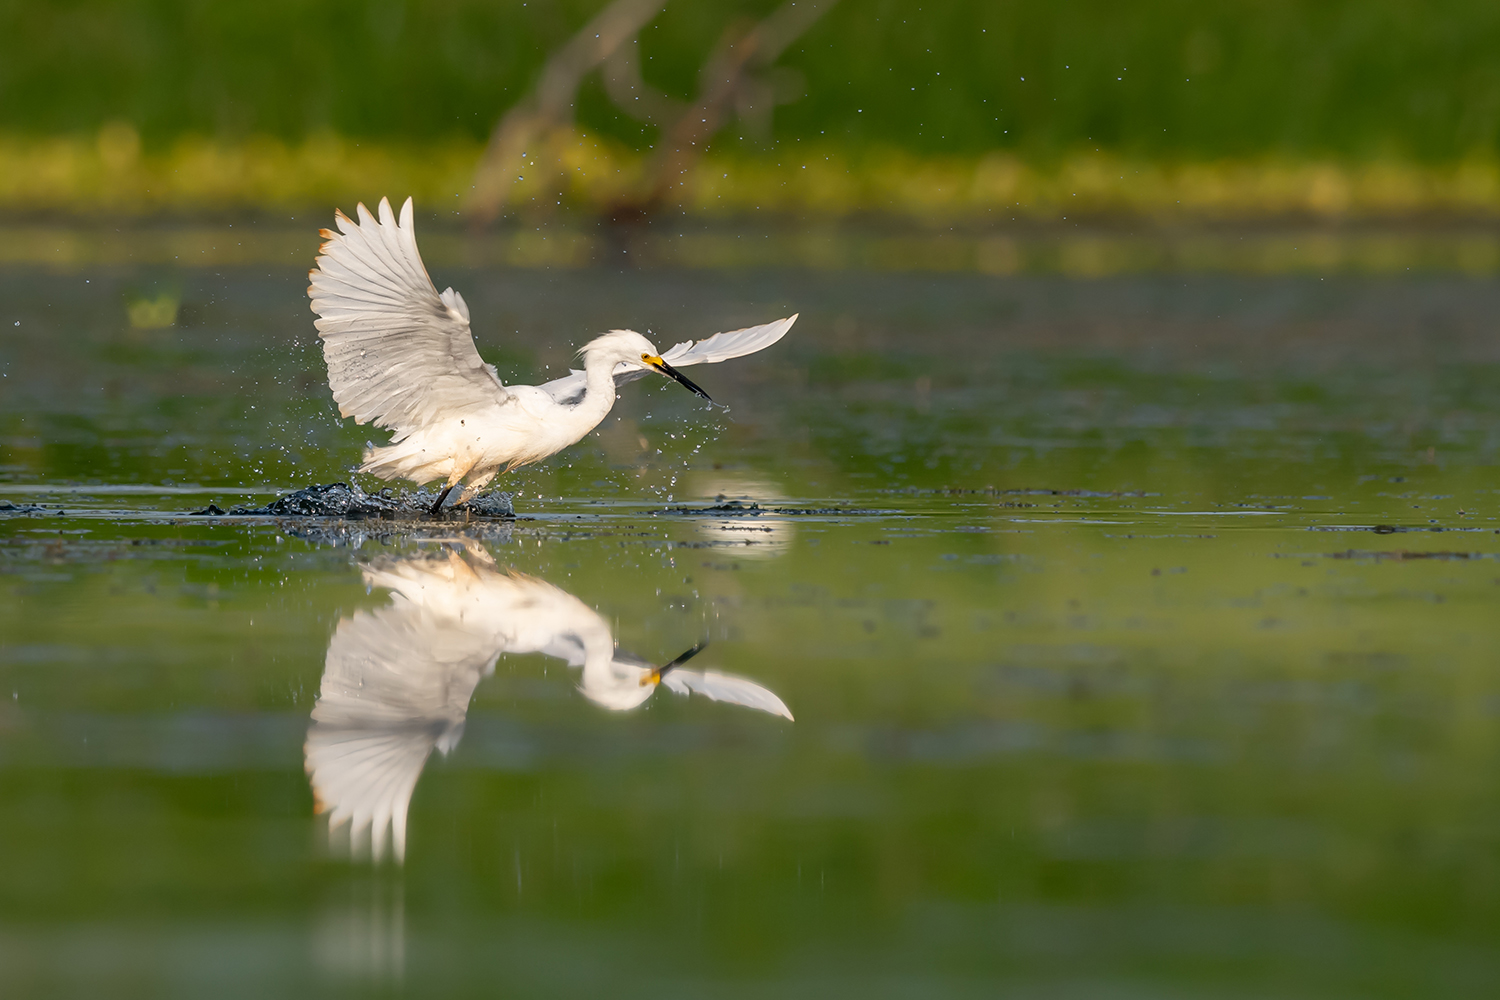 New Gear Leads to Awesome Morning of Amazing Bird Photography